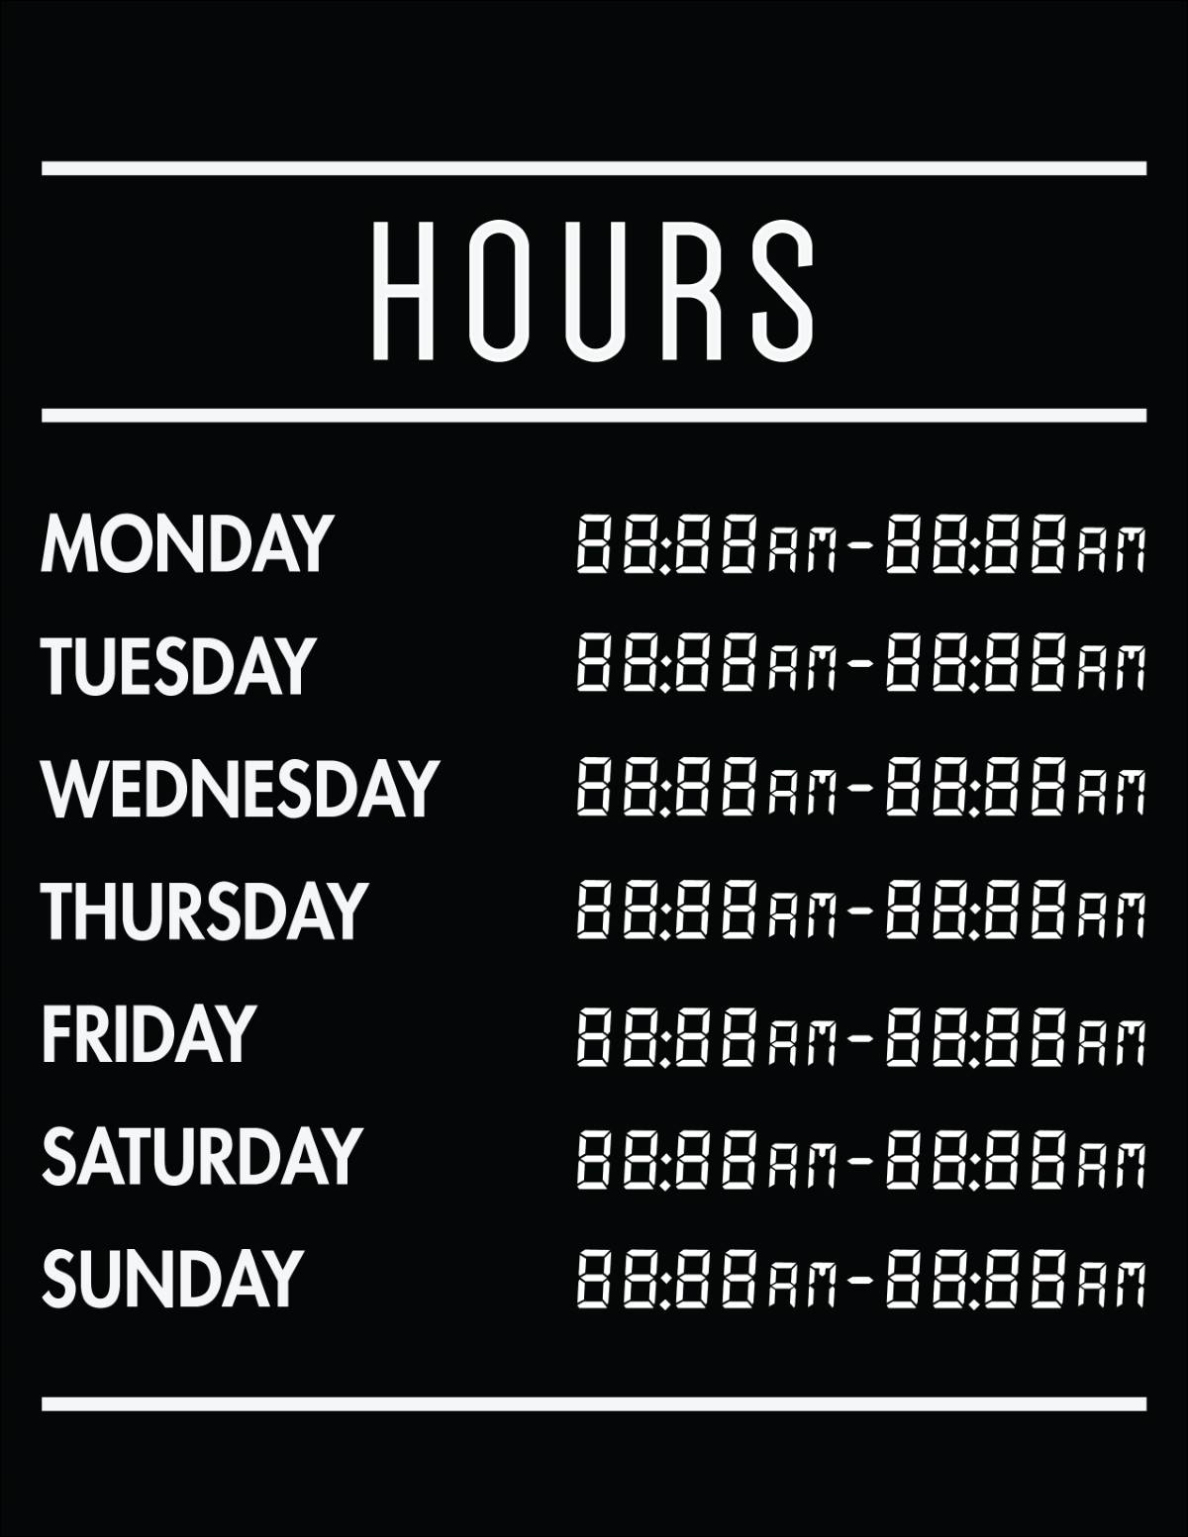 50 Free Business Hours Of Operation Sign Templates | Customize & Print In Printable Business Hours Sign Template